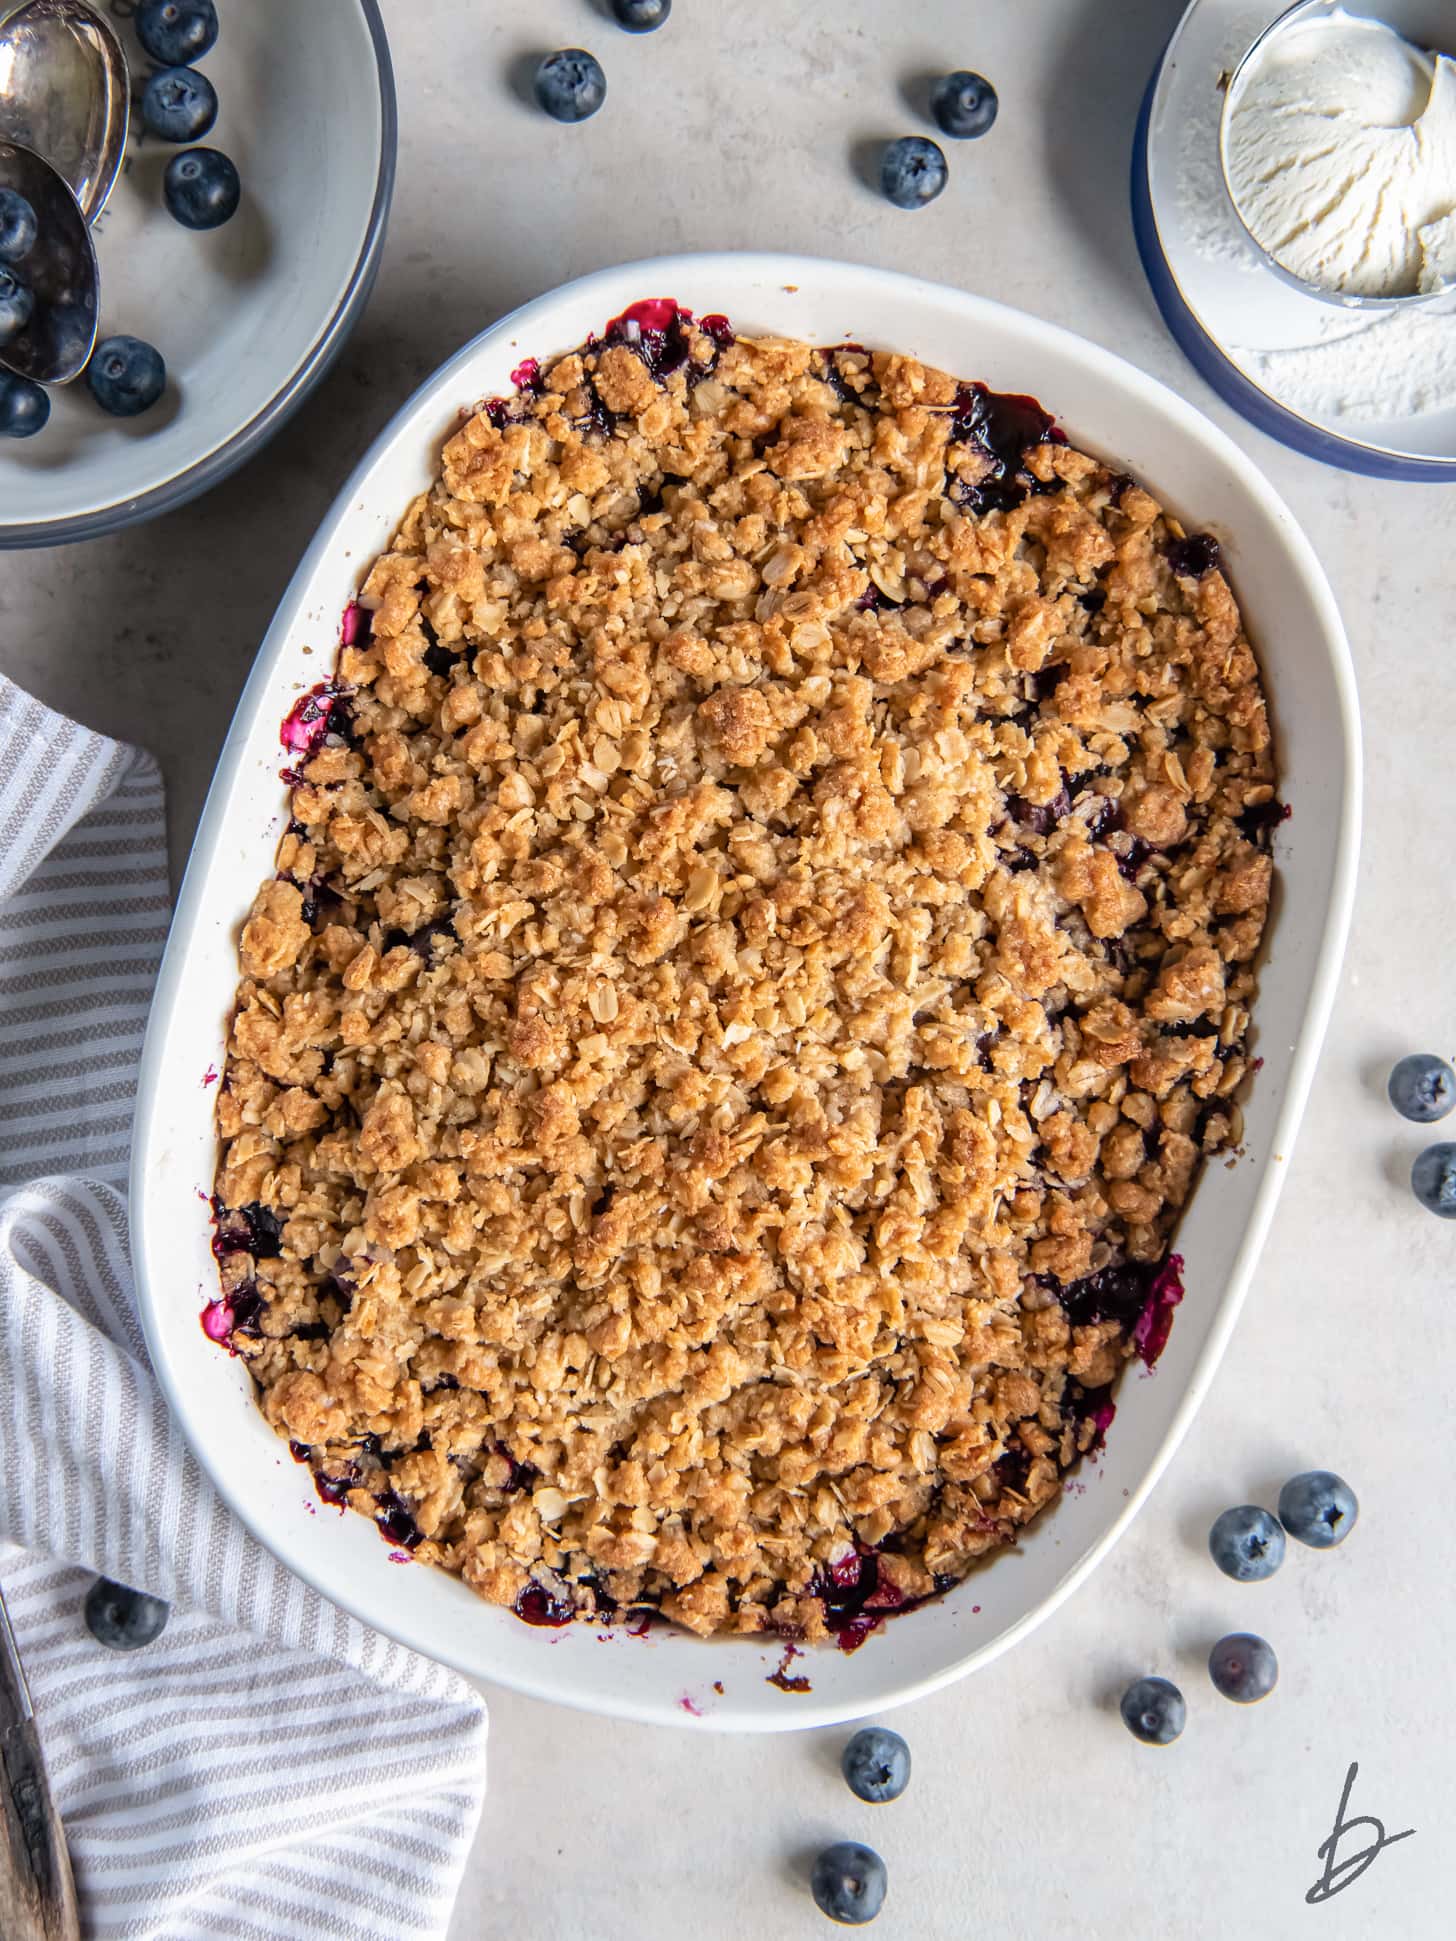 blueberry crisp in a baking dish with oat topping.